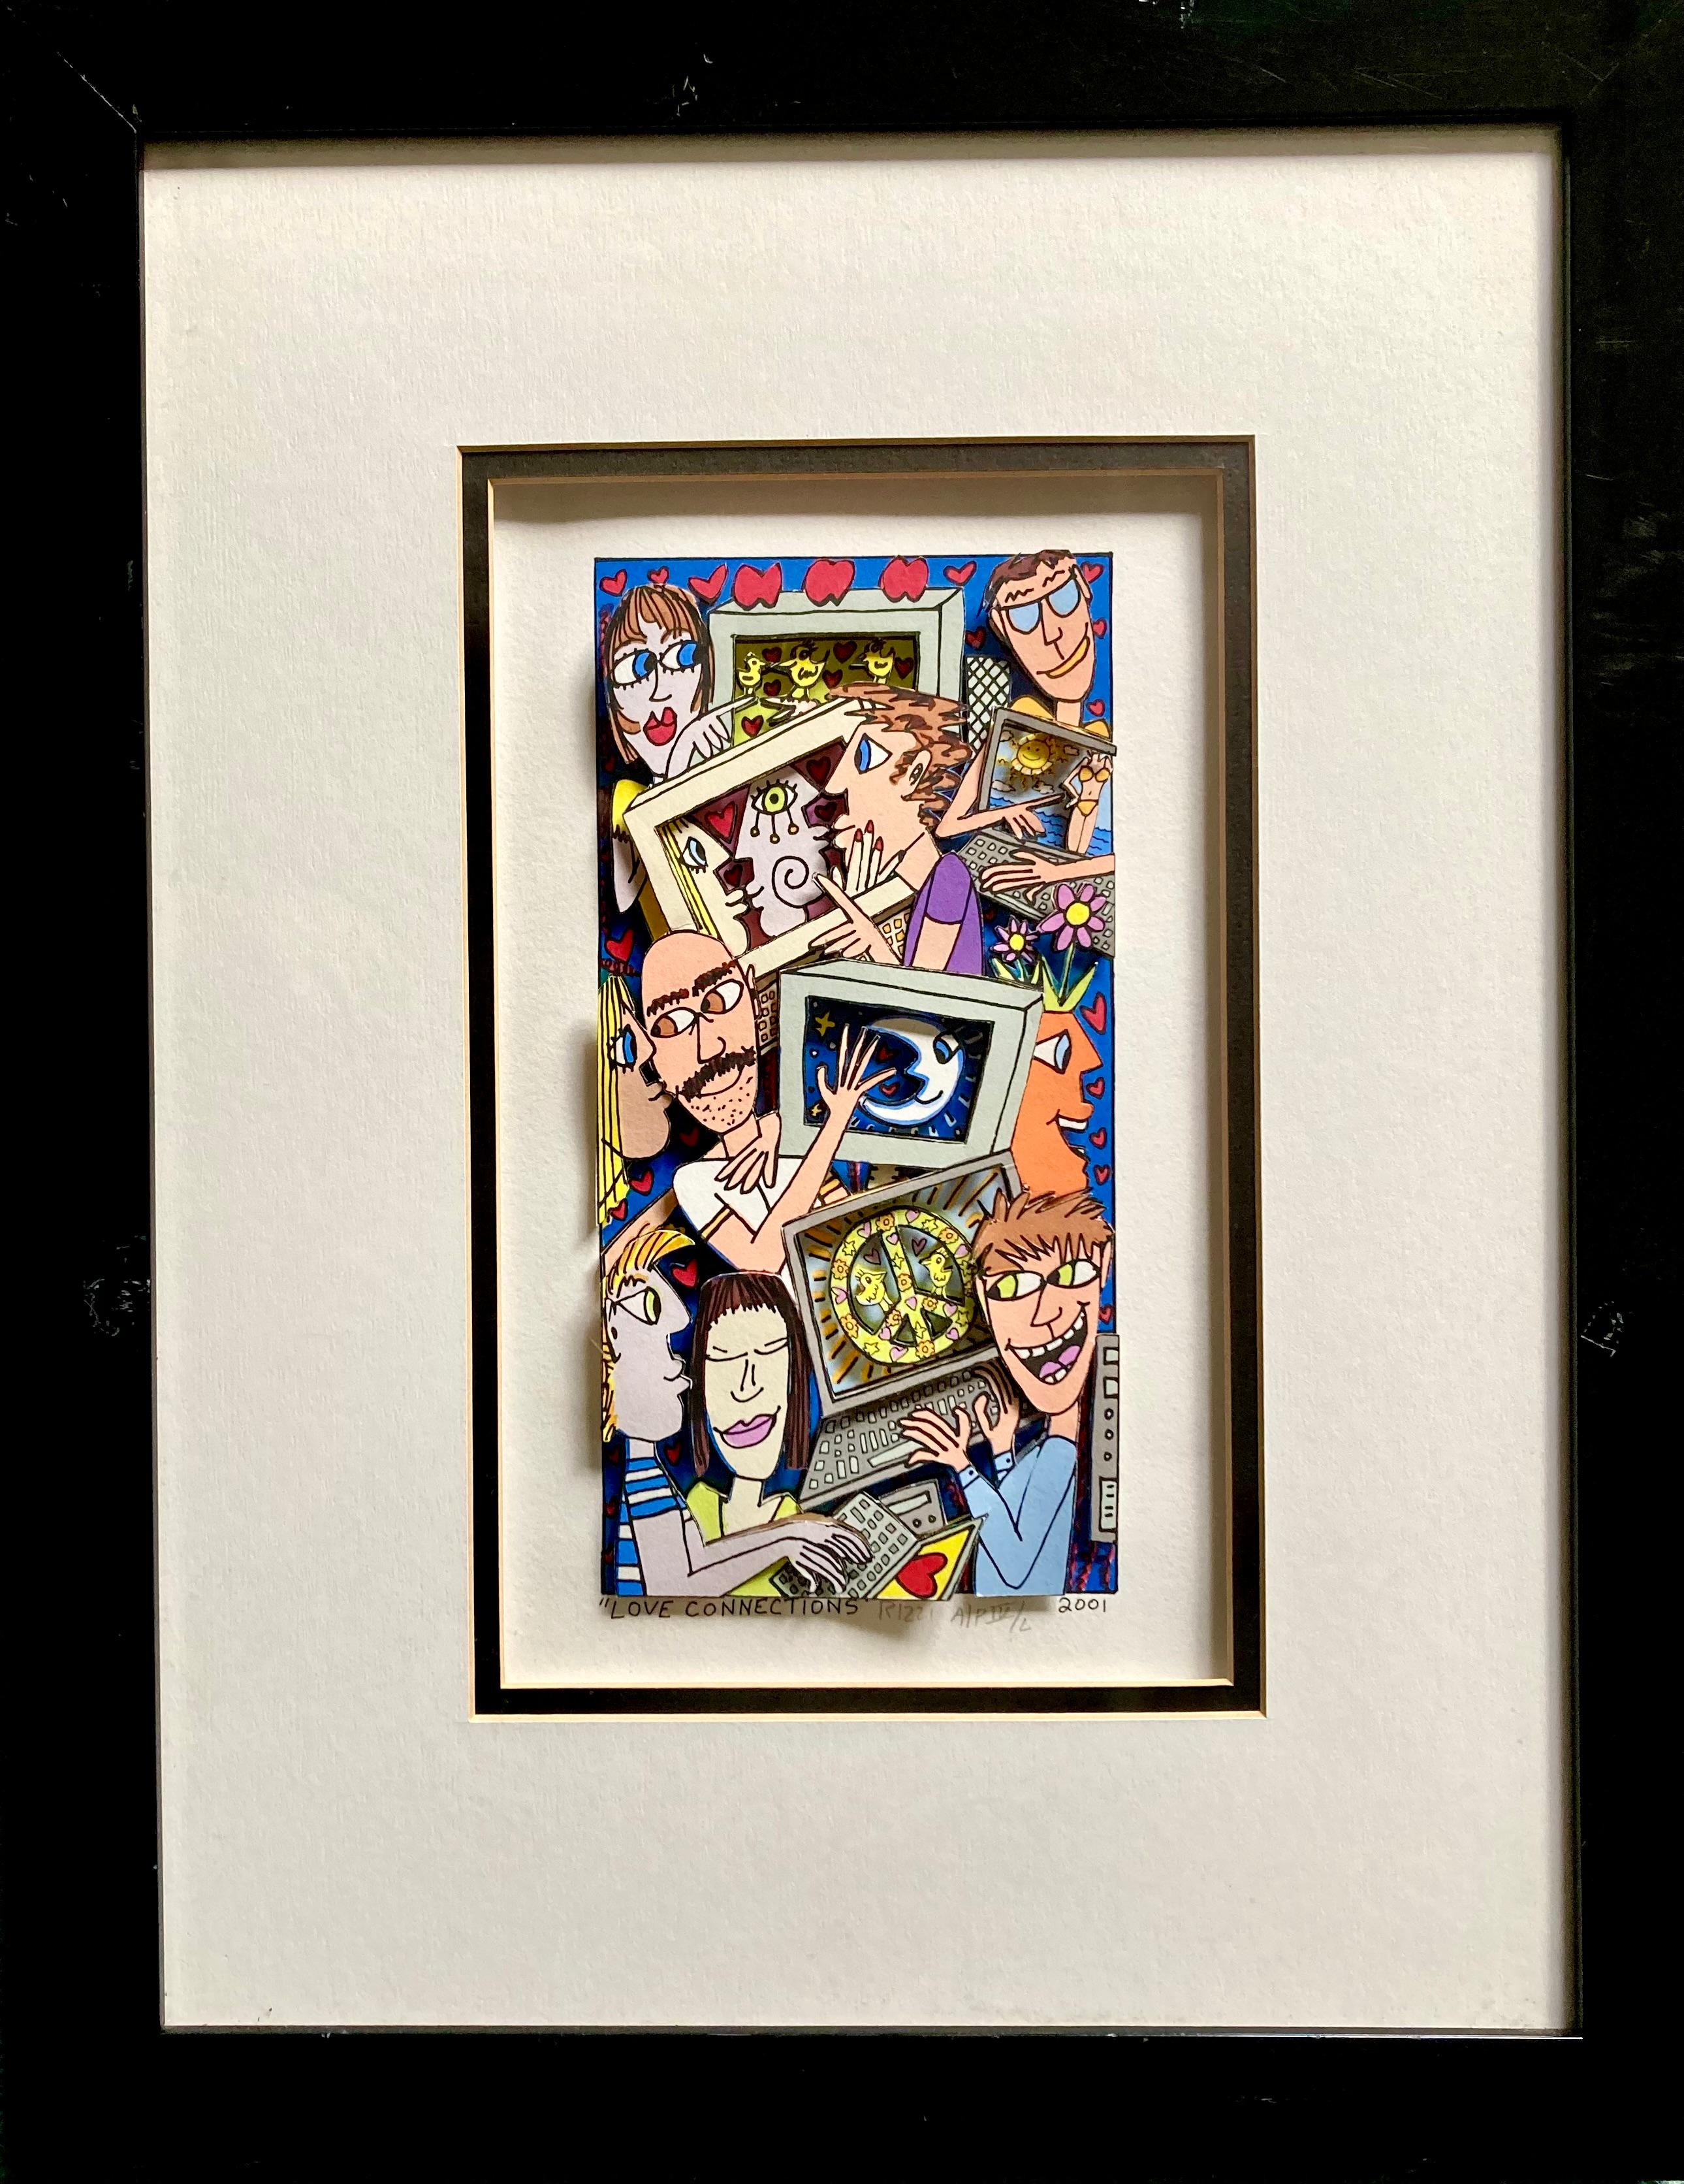 "Love connections" - Print by James Rizzi